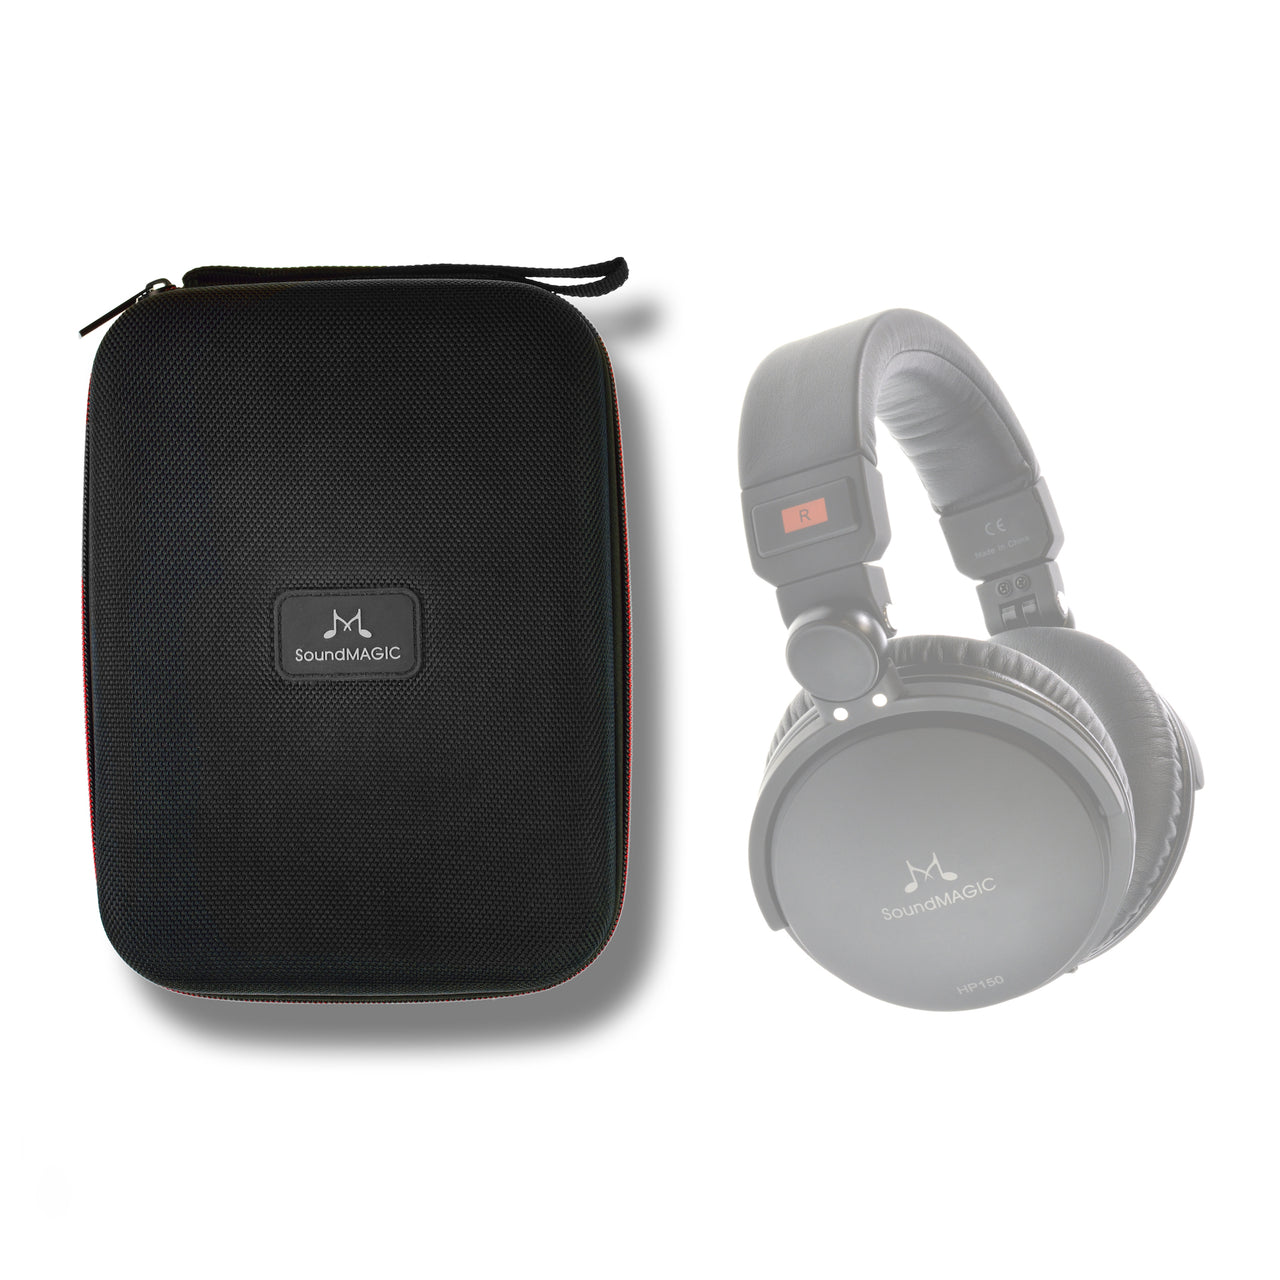 SoundMAGIC Replacement Headphone Hard Case for HP150/HP151/HP200 - SoundMAGICheadphones.com